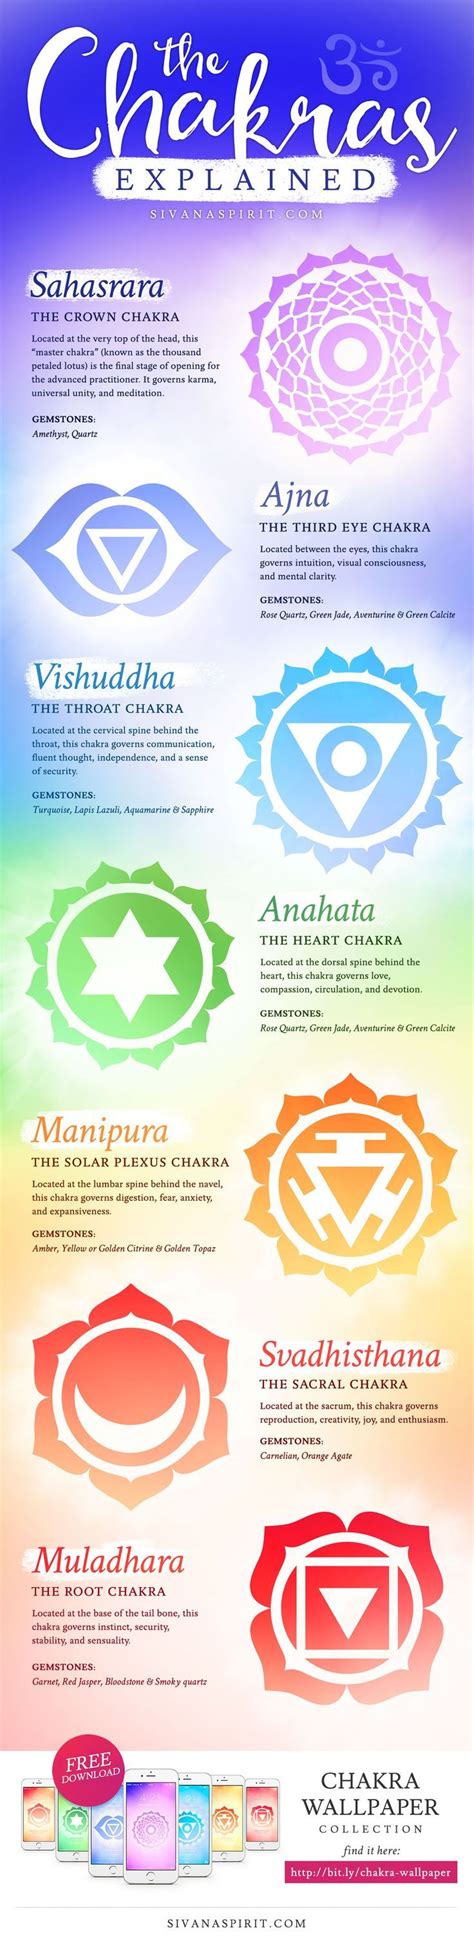 This Beautiful Infographic Explains Chakras In An Easy To Understand